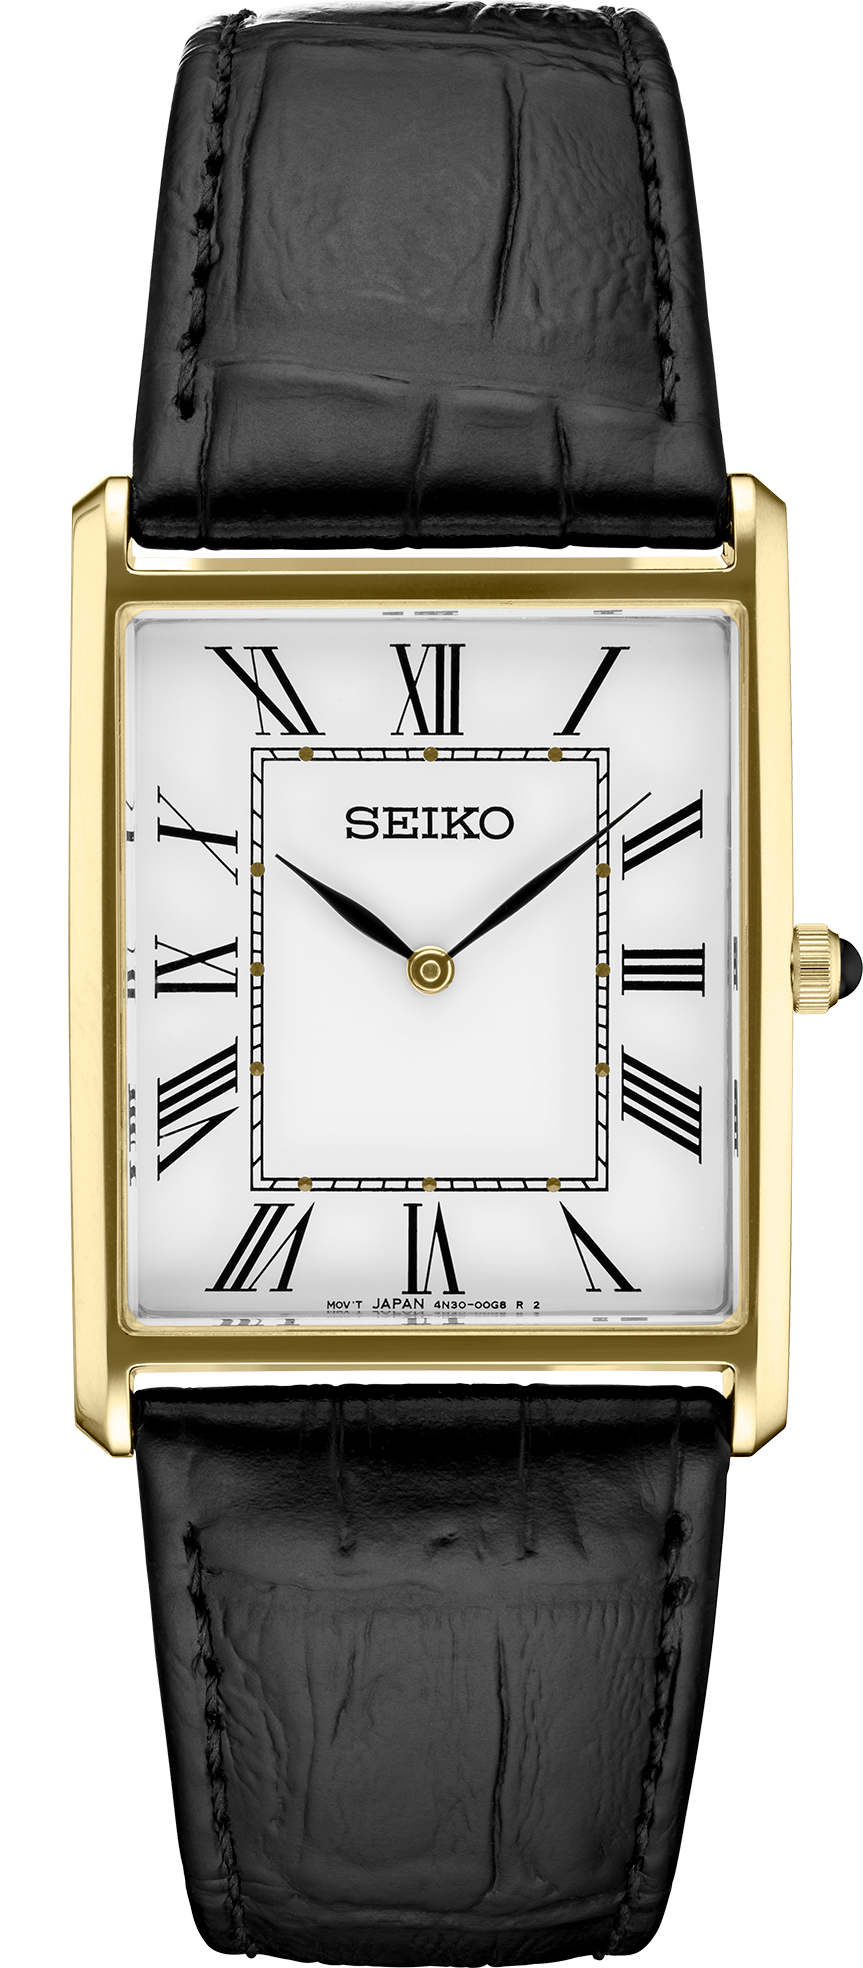 Seiko Men's Essentials Watch from the front view